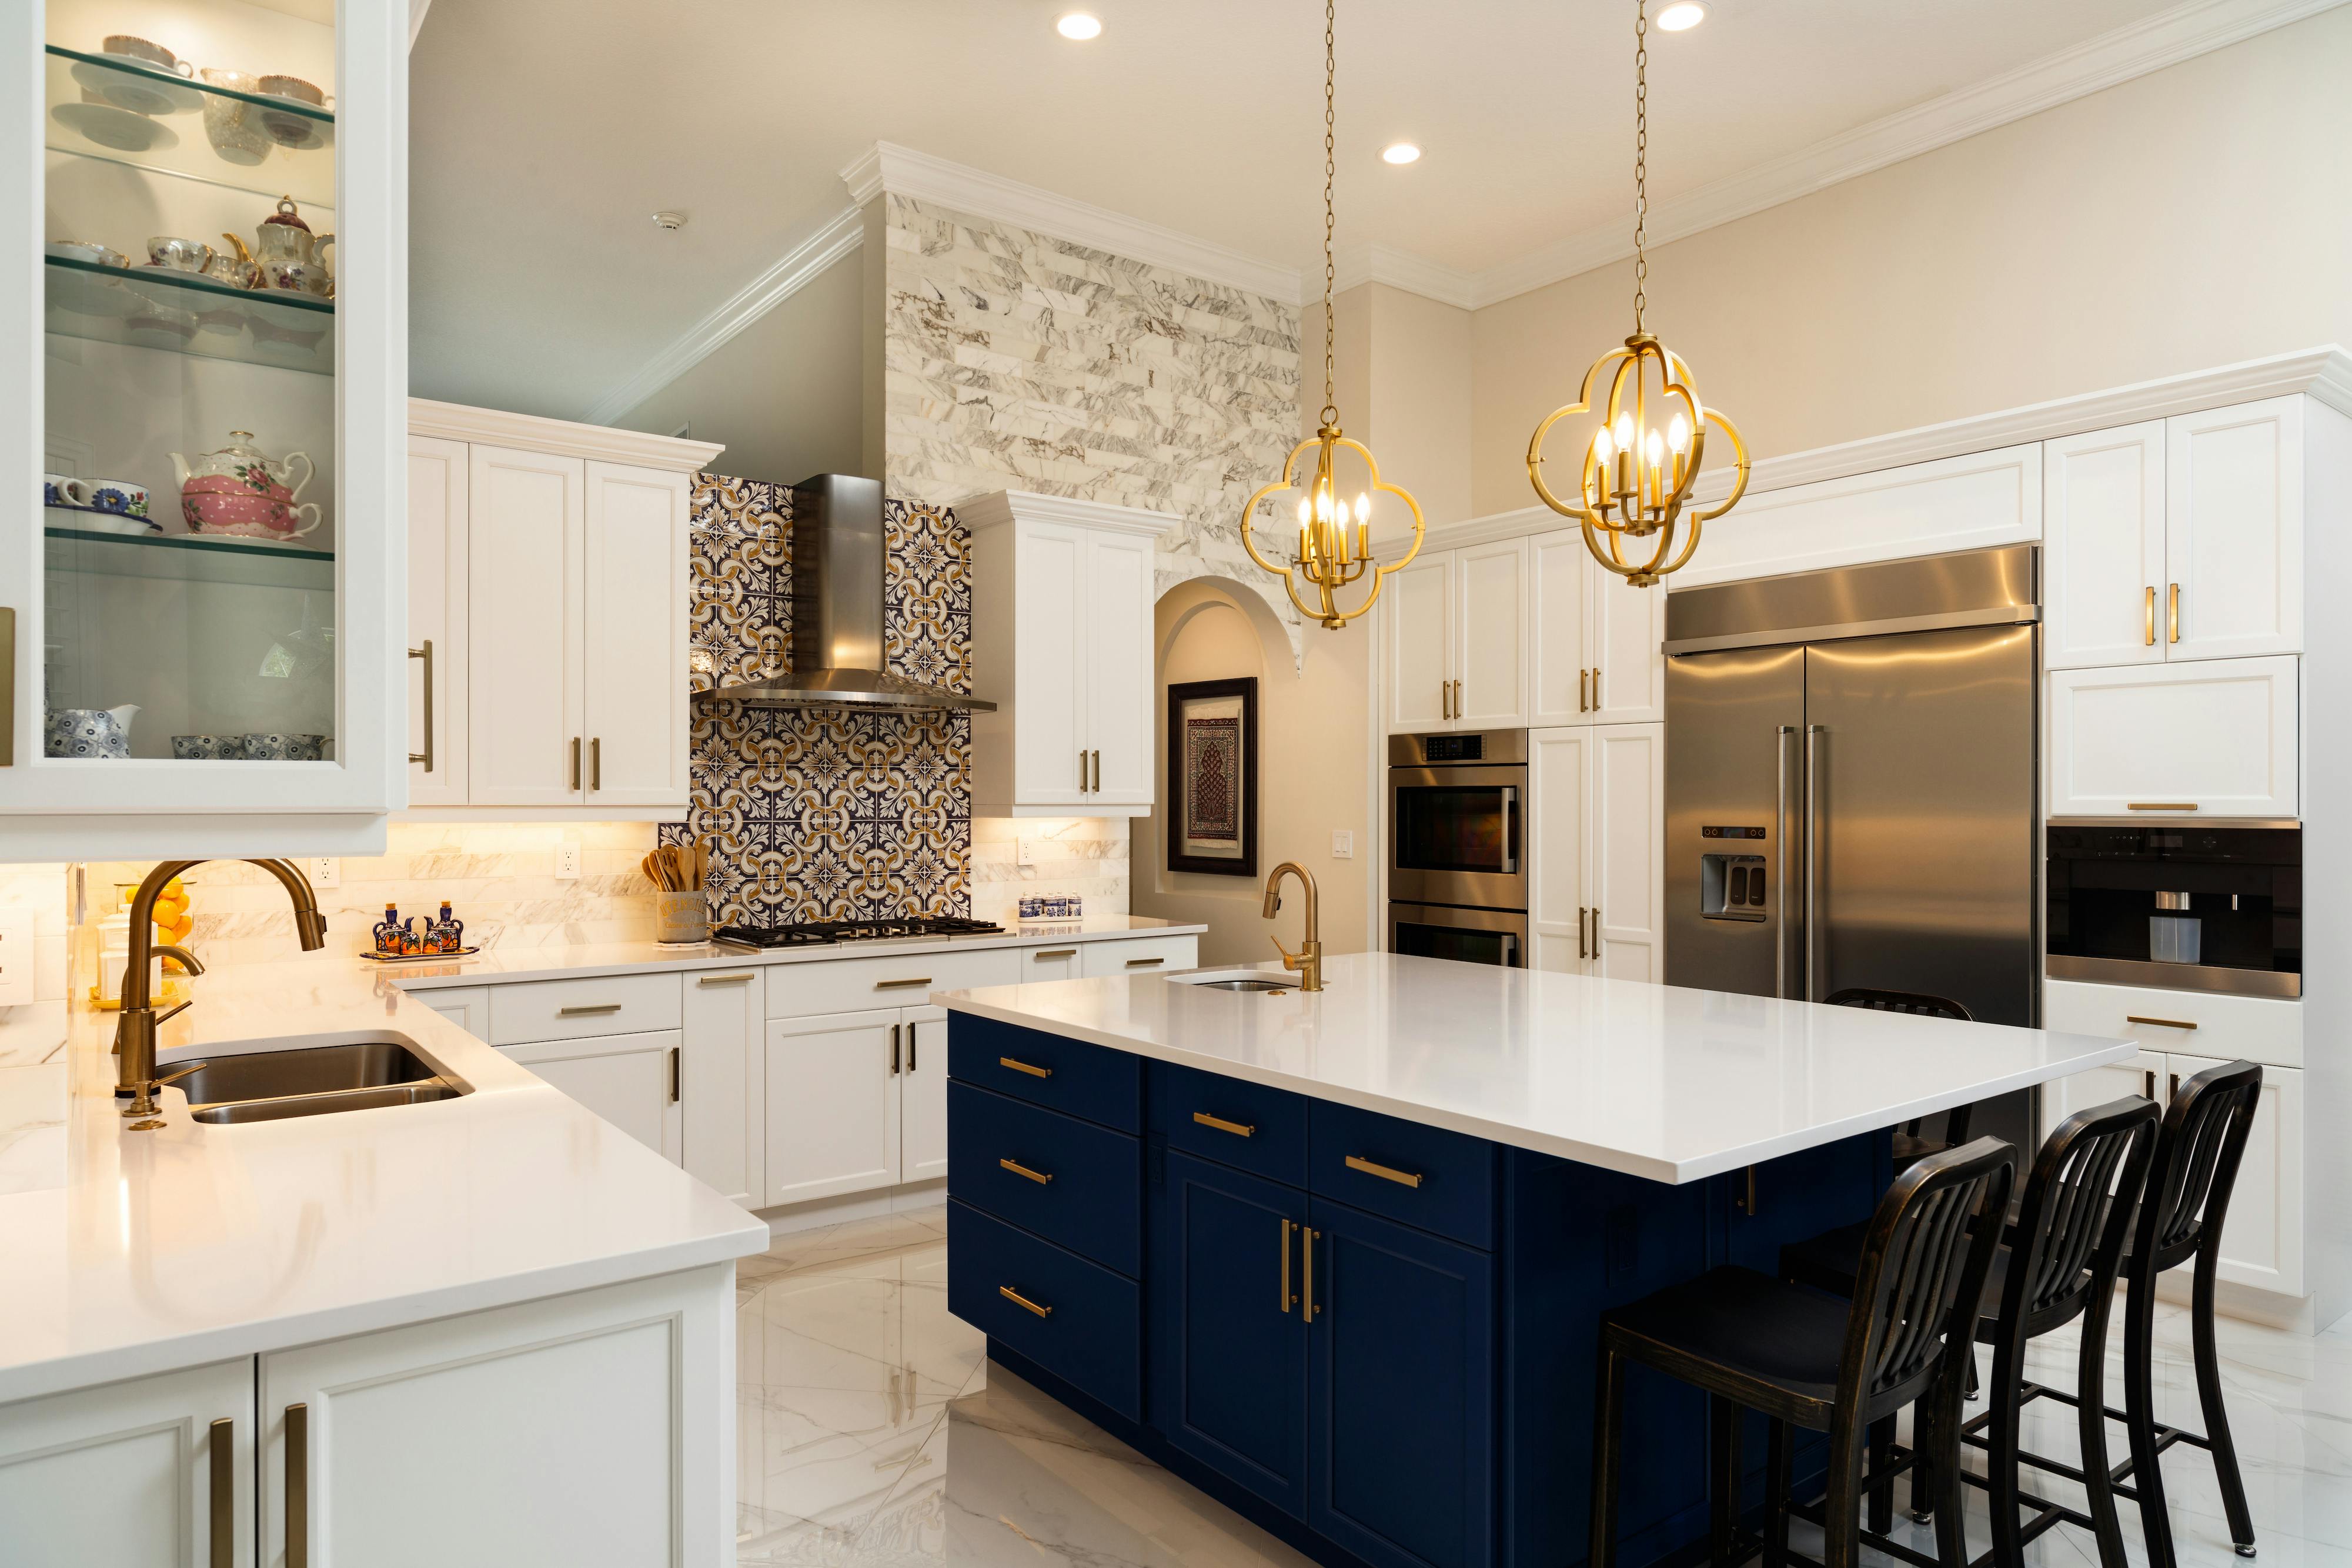 How Much Does it Cost to Remodel a Kitchen? - SoFi